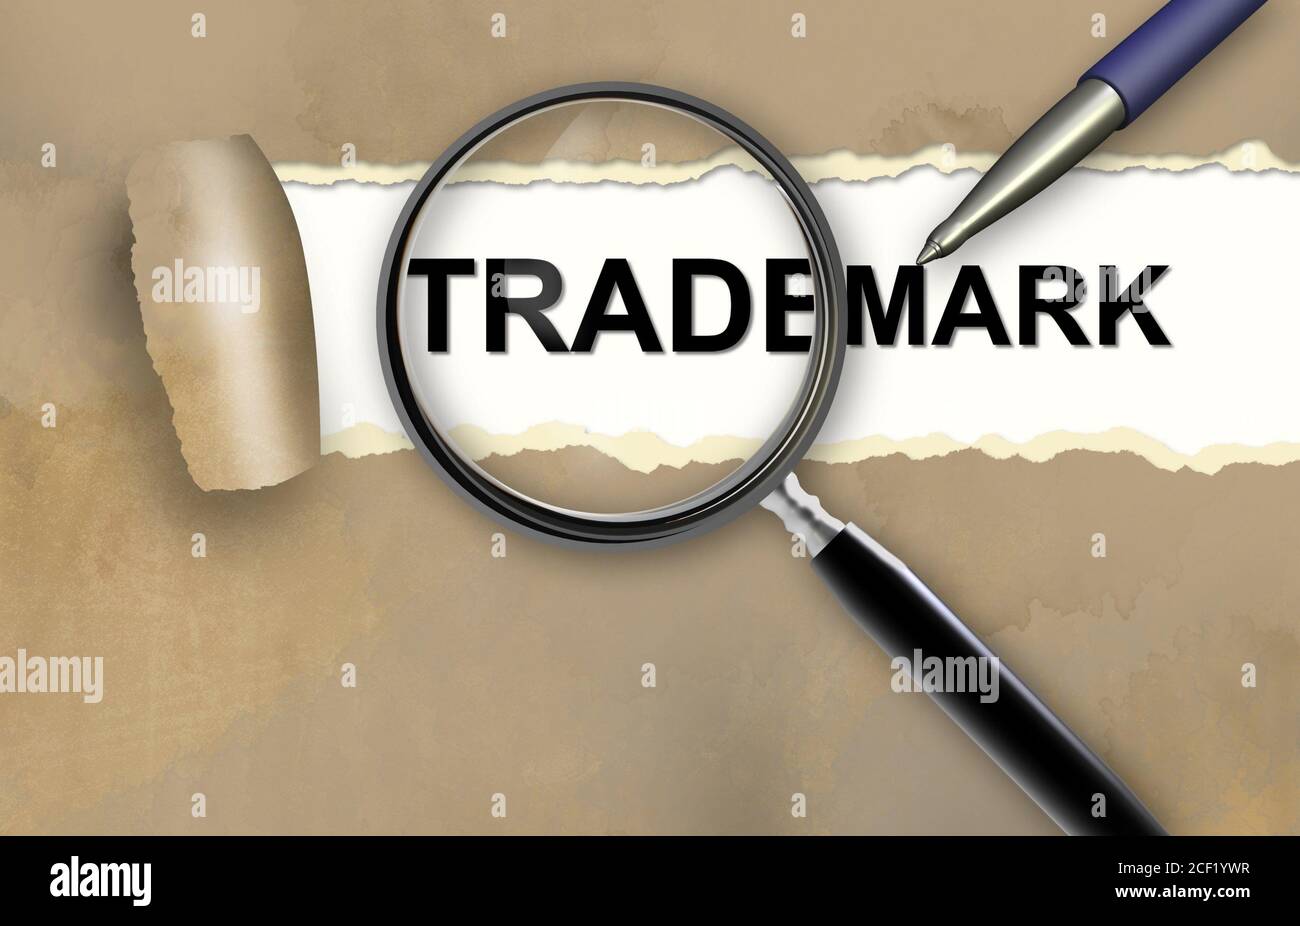 Trademark text made in 3d software. Stock Photo